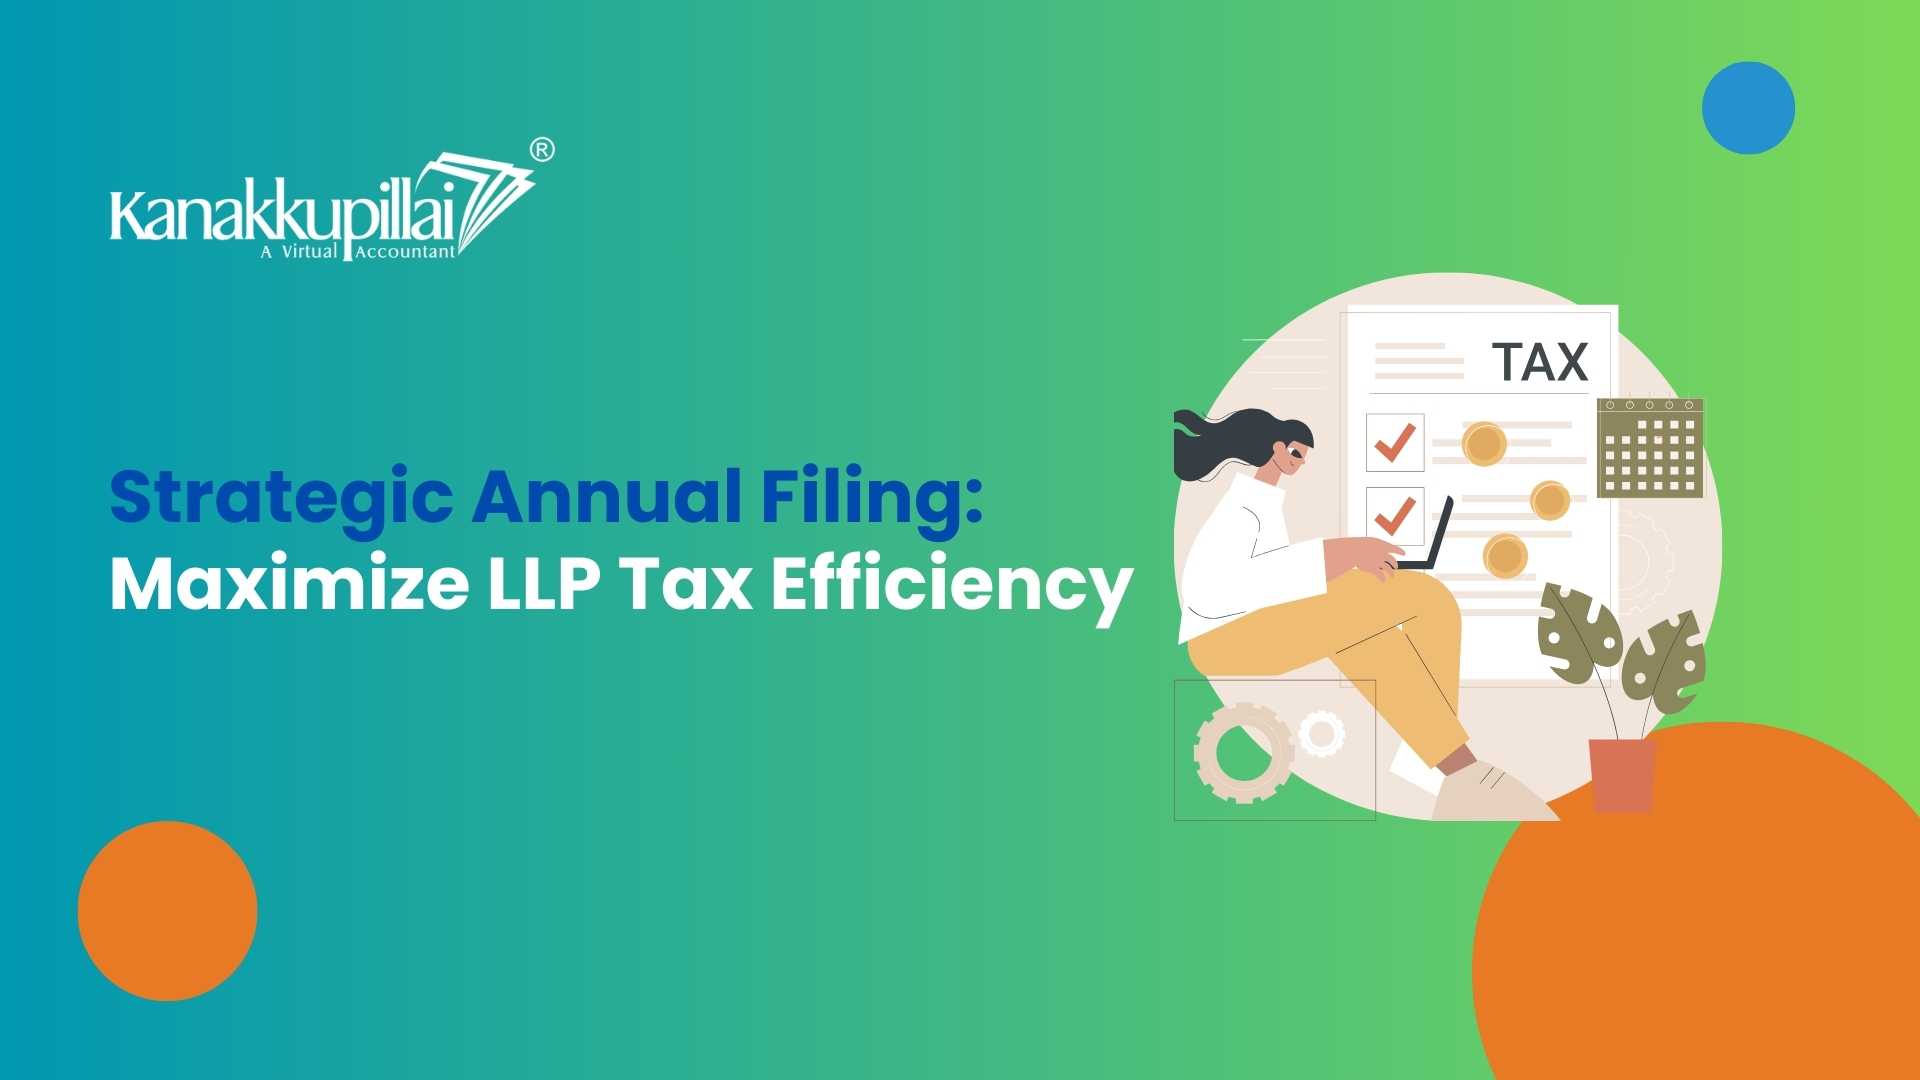 You are currently viewing Maximizing Tax Efficiency Through Strategic Annual Filing for Your LLP